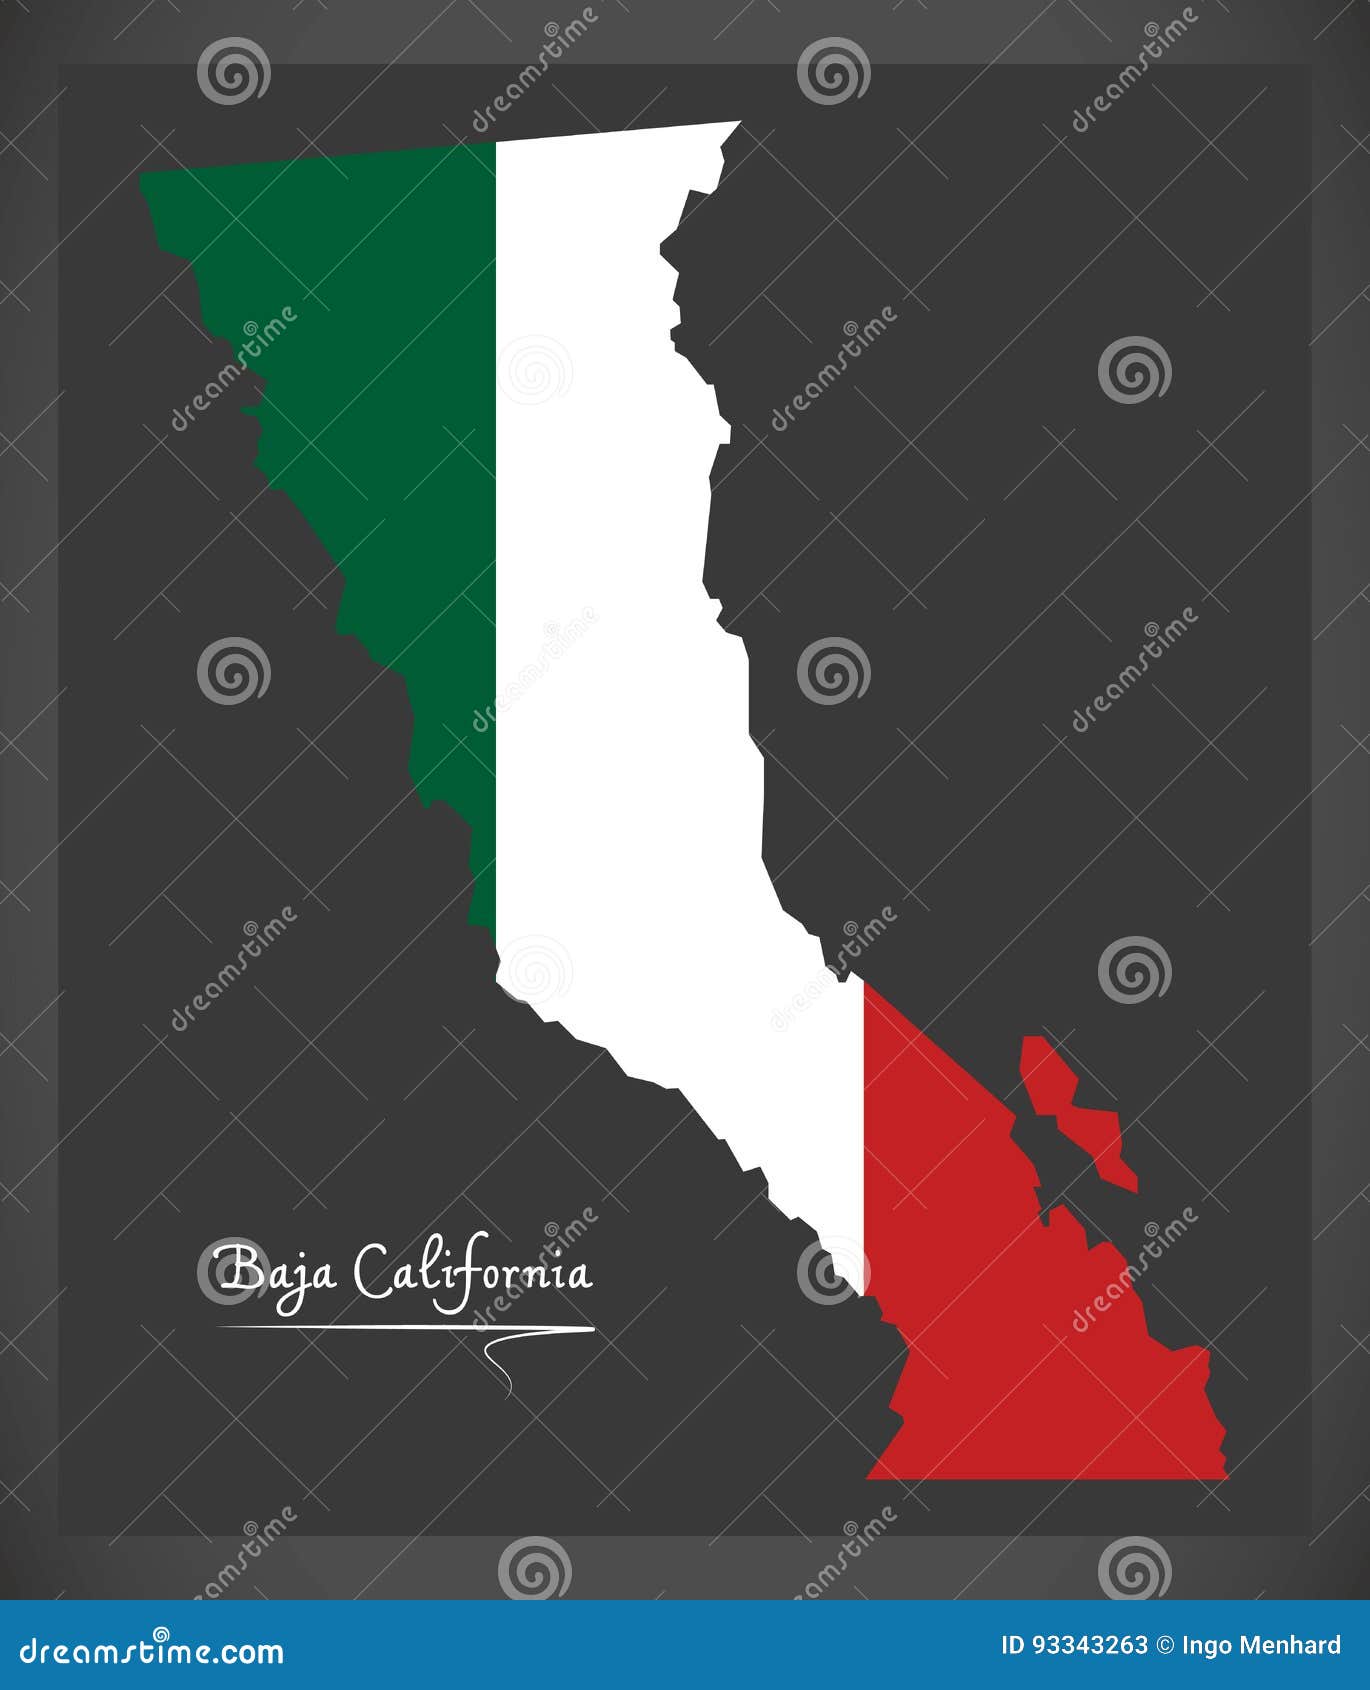 Baja California Map with Mexican National Flag Illustration Stock